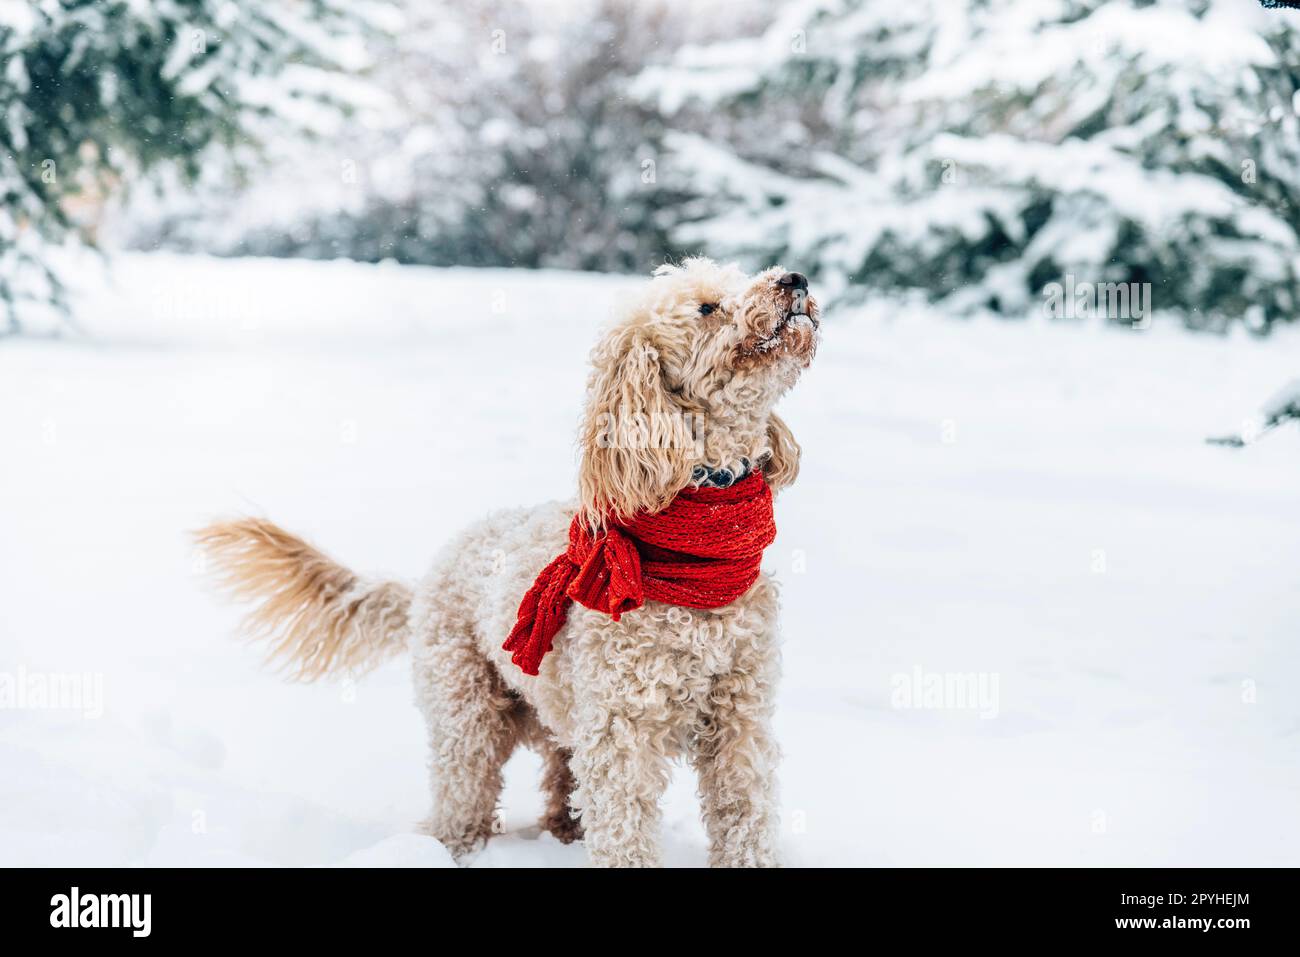 Cute and funny little dog with red scarf playing and jumping in the snow. Stock Photo